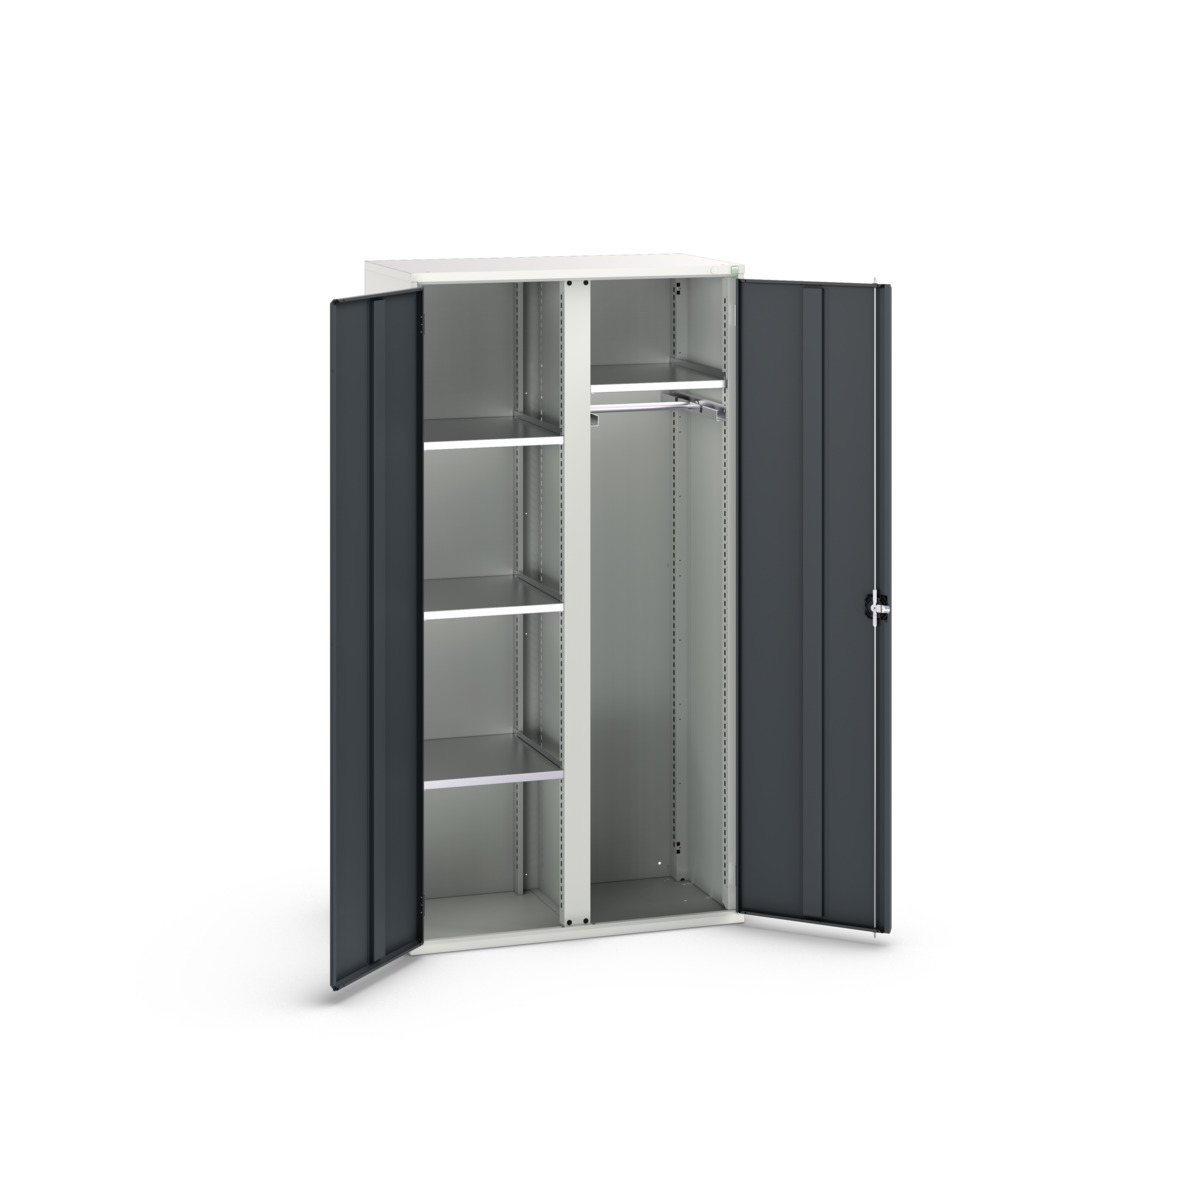 16926579. - verso kitted cupboard